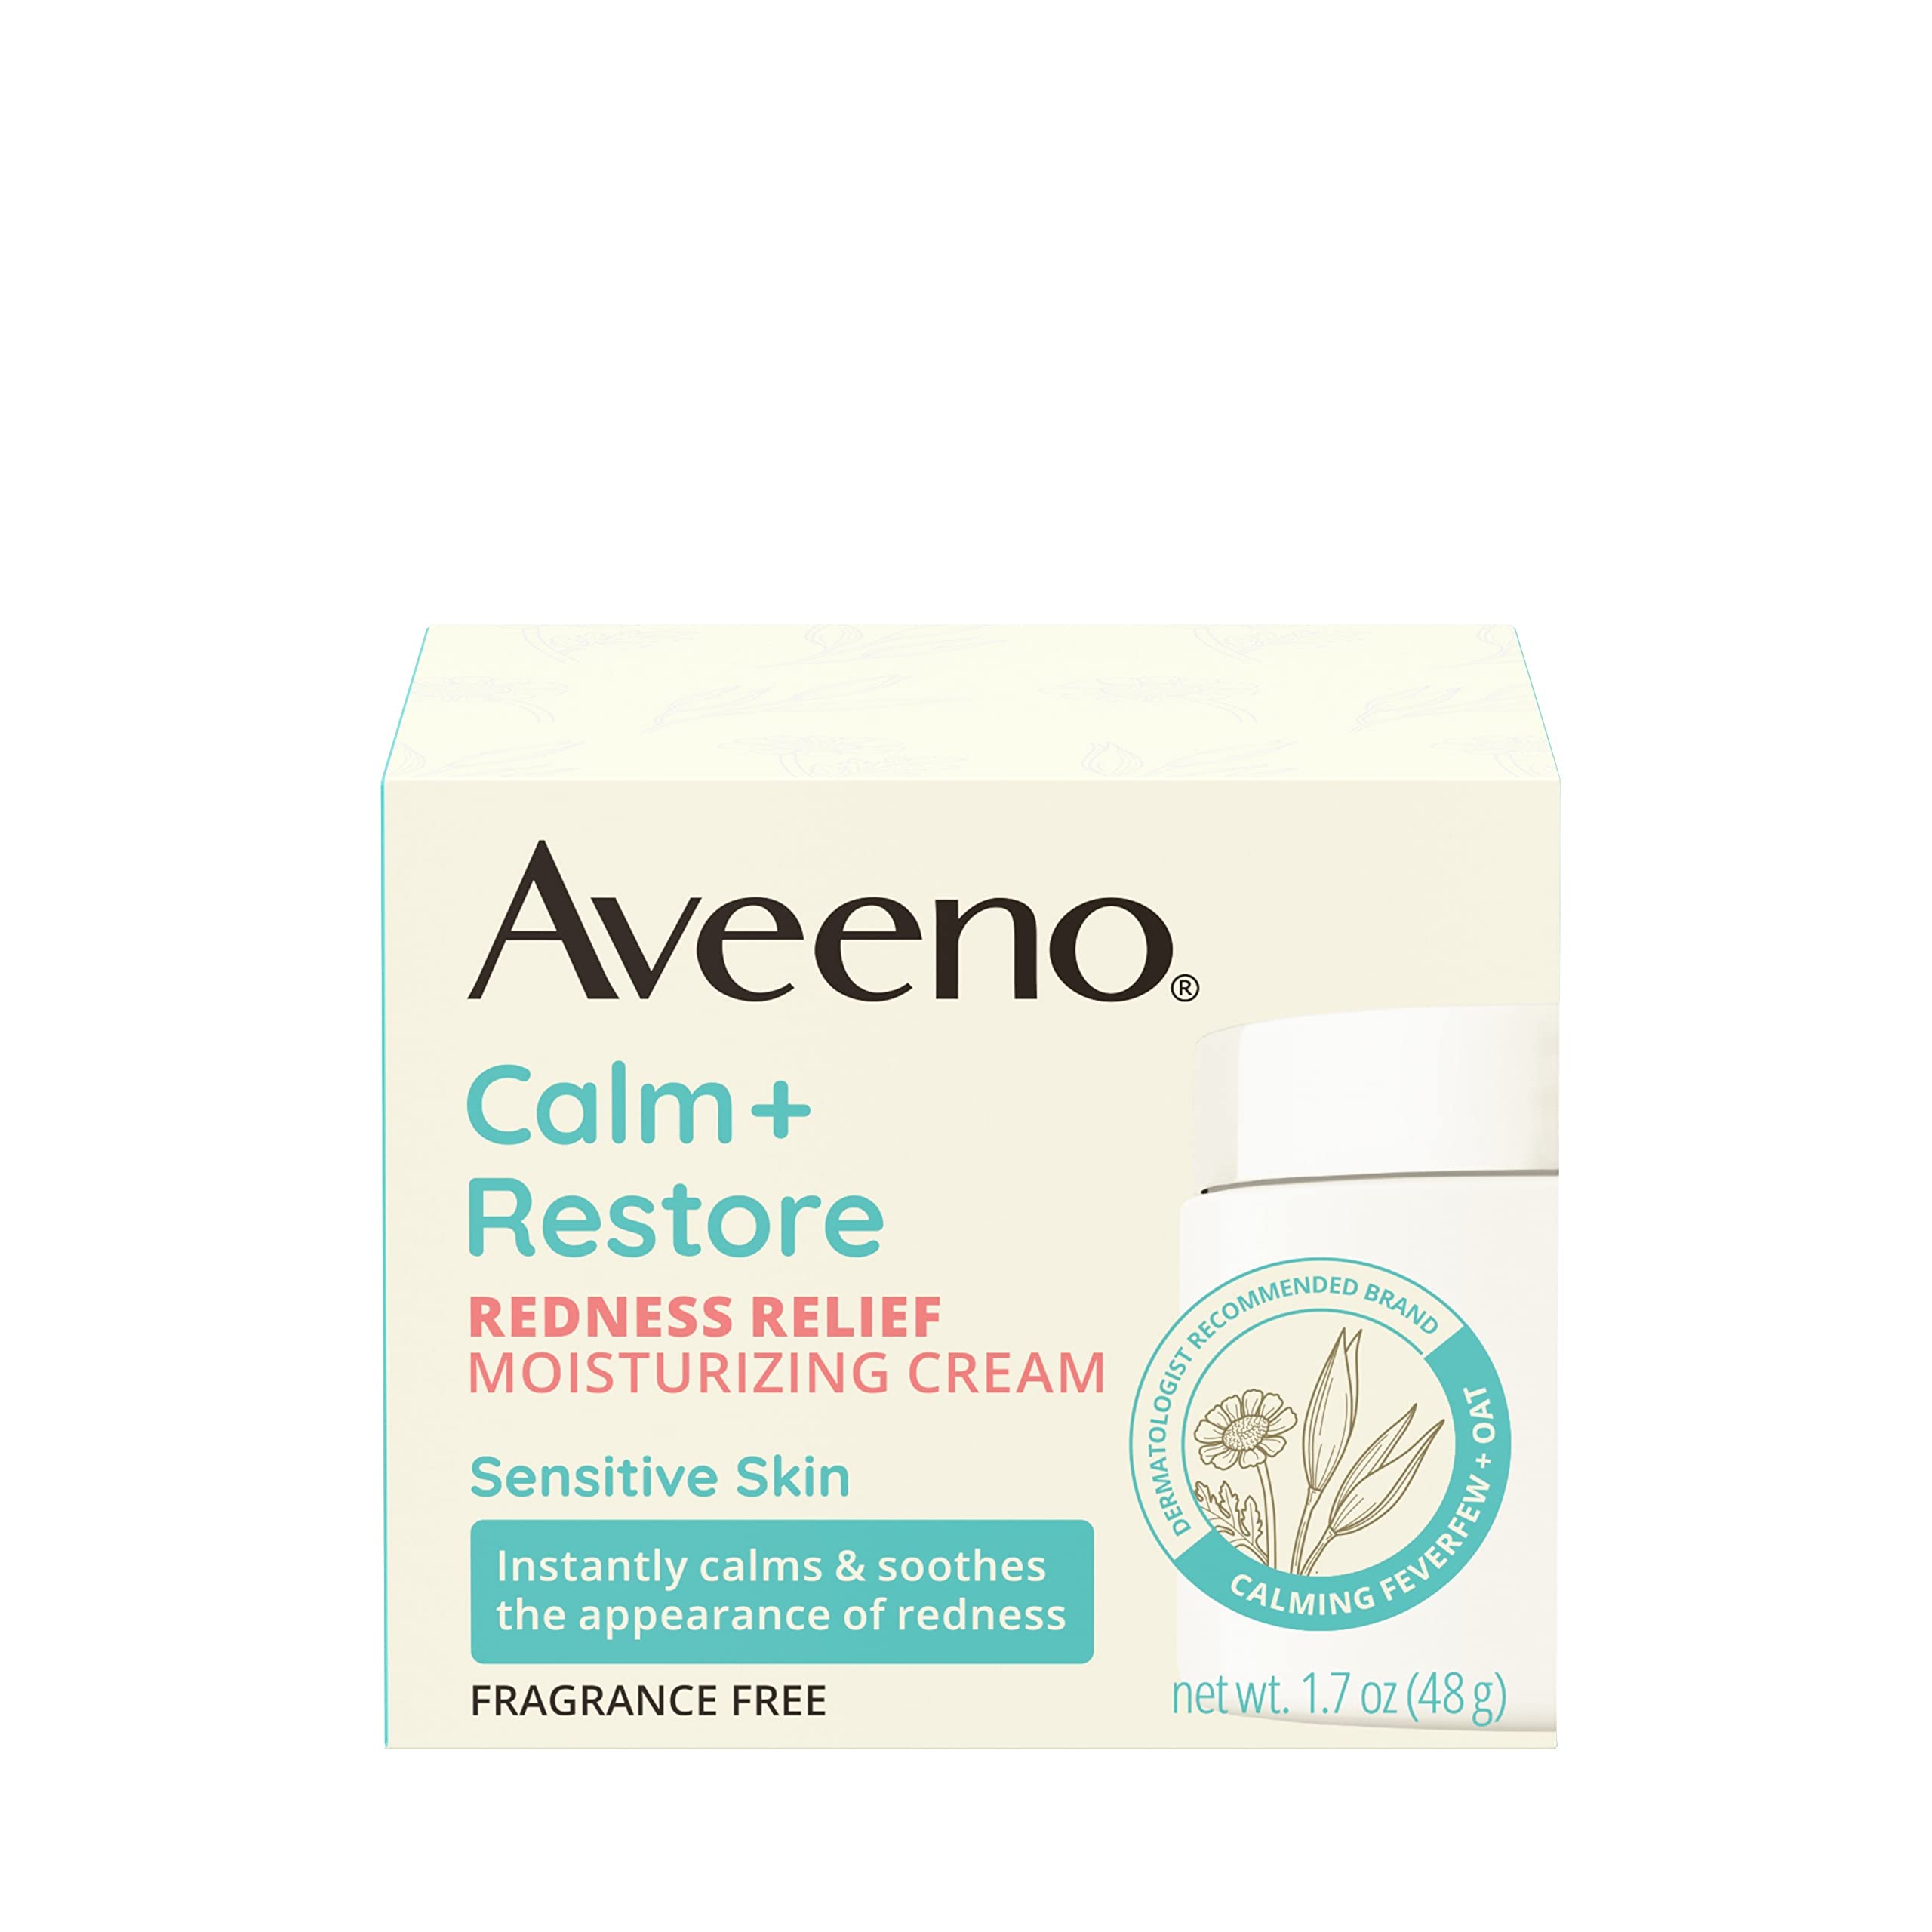 Aveeno Calm + Restore Redness Relief Moisturizing Cream, Daily Facial Cream for Sensitive Skin Instantly Calms & Soothes the Appearance of Redness, Fragrance-Free & Hypoallergenic, 1.7 oz